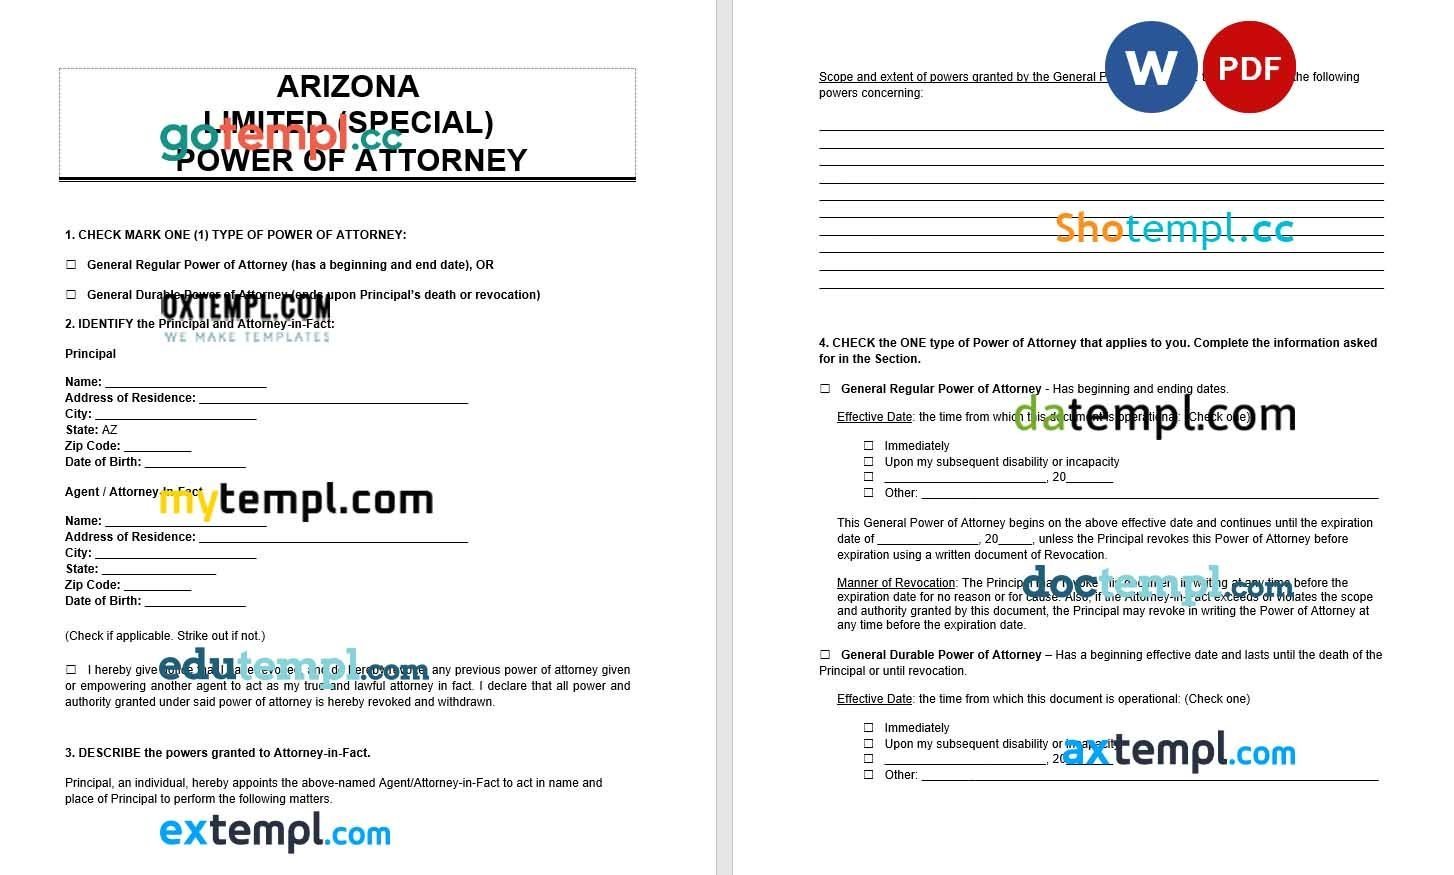 Arizona Limited Power of Attorney example, fully editable